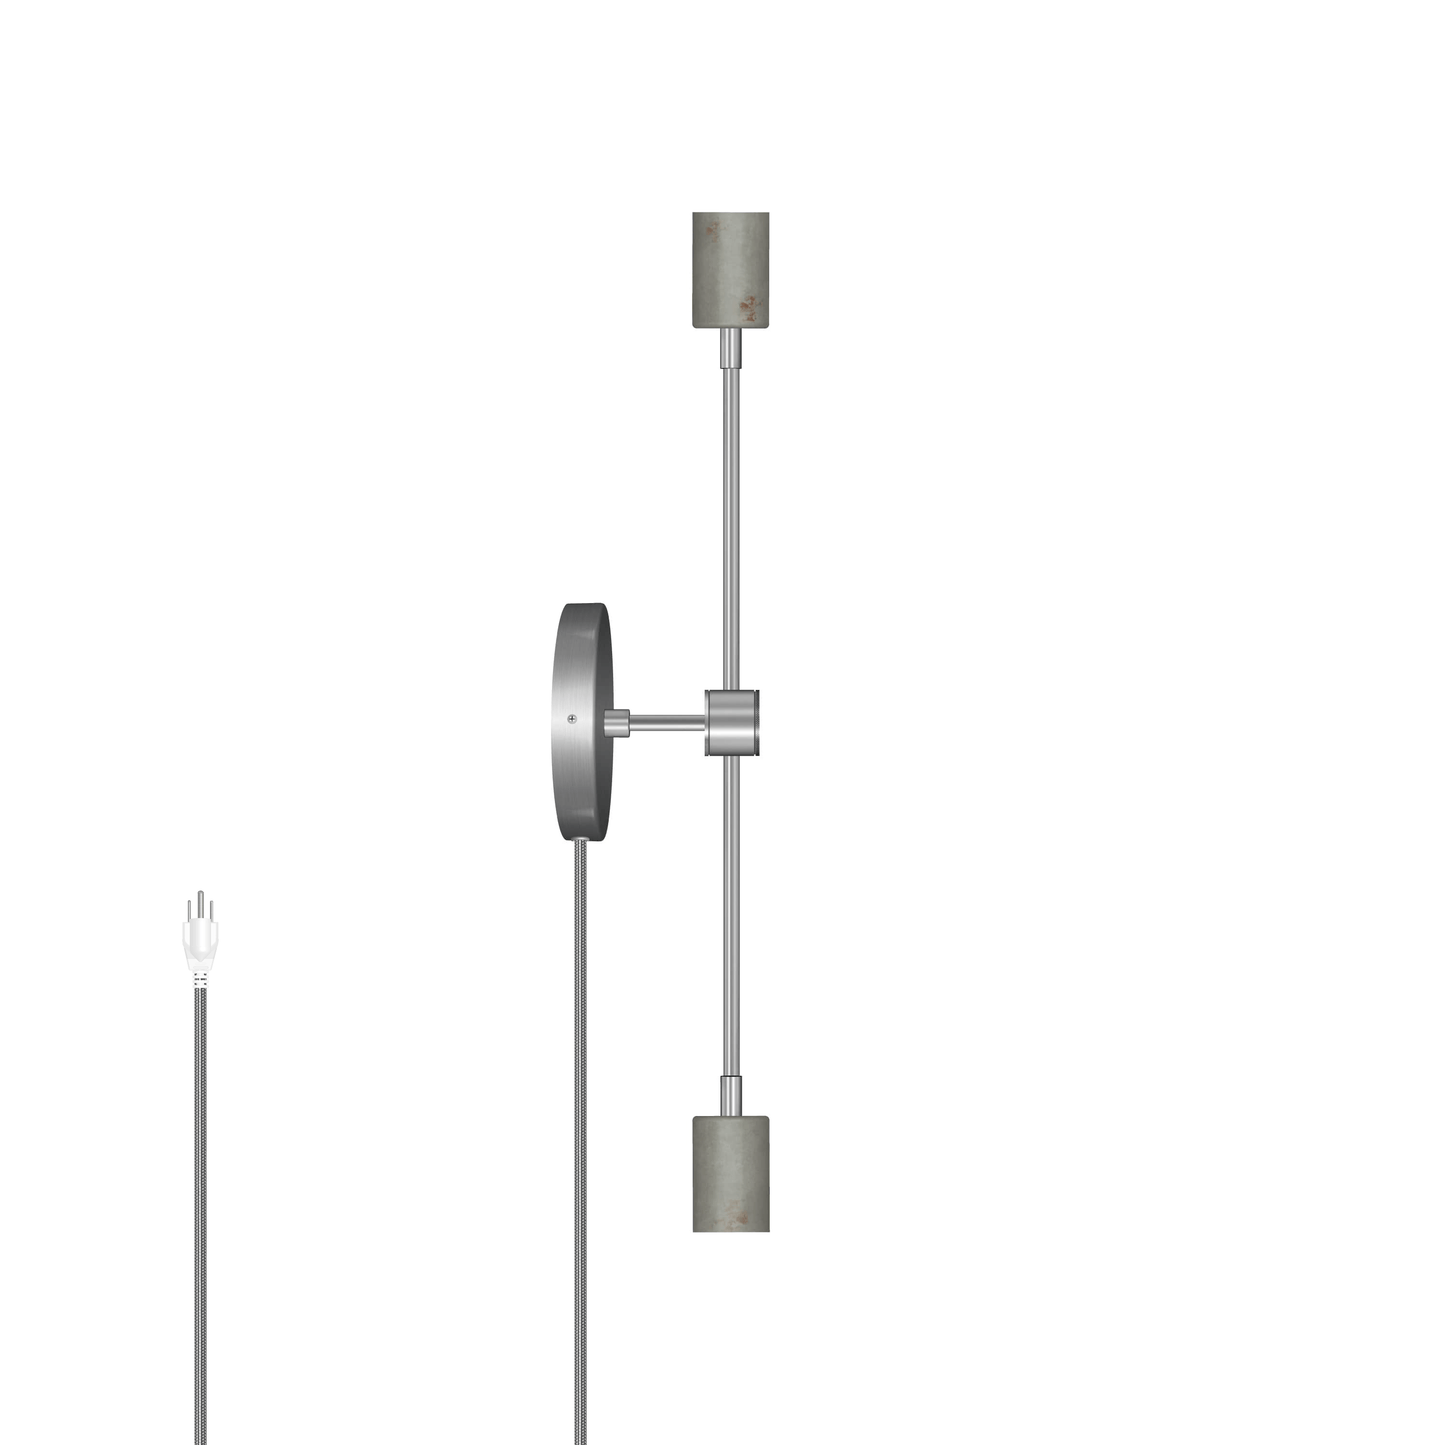 Duo Plug-In Sconce